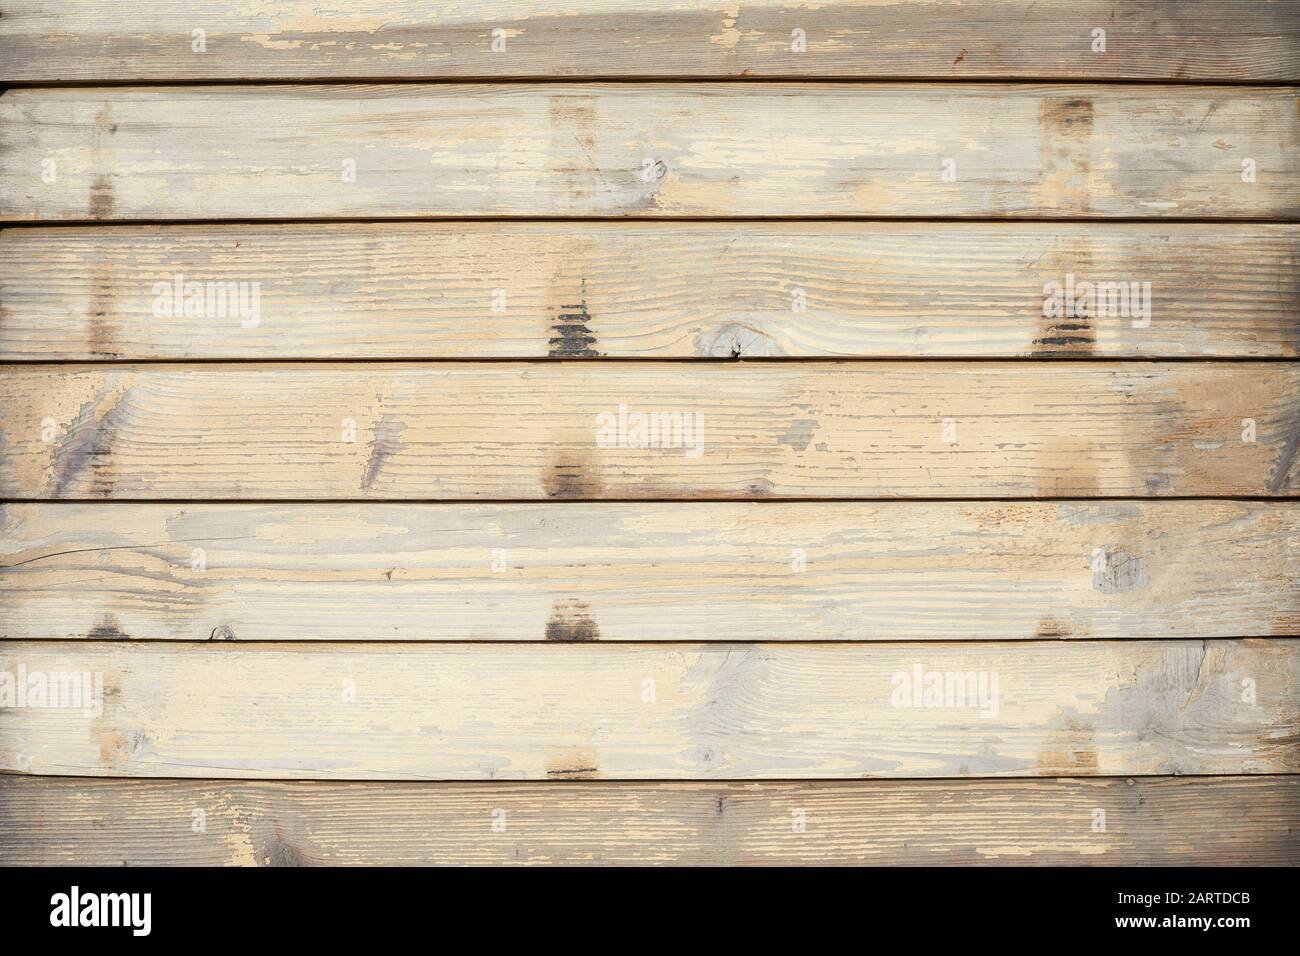 Wooden texture background with rough horizontal planks in sunlight Stock Photo